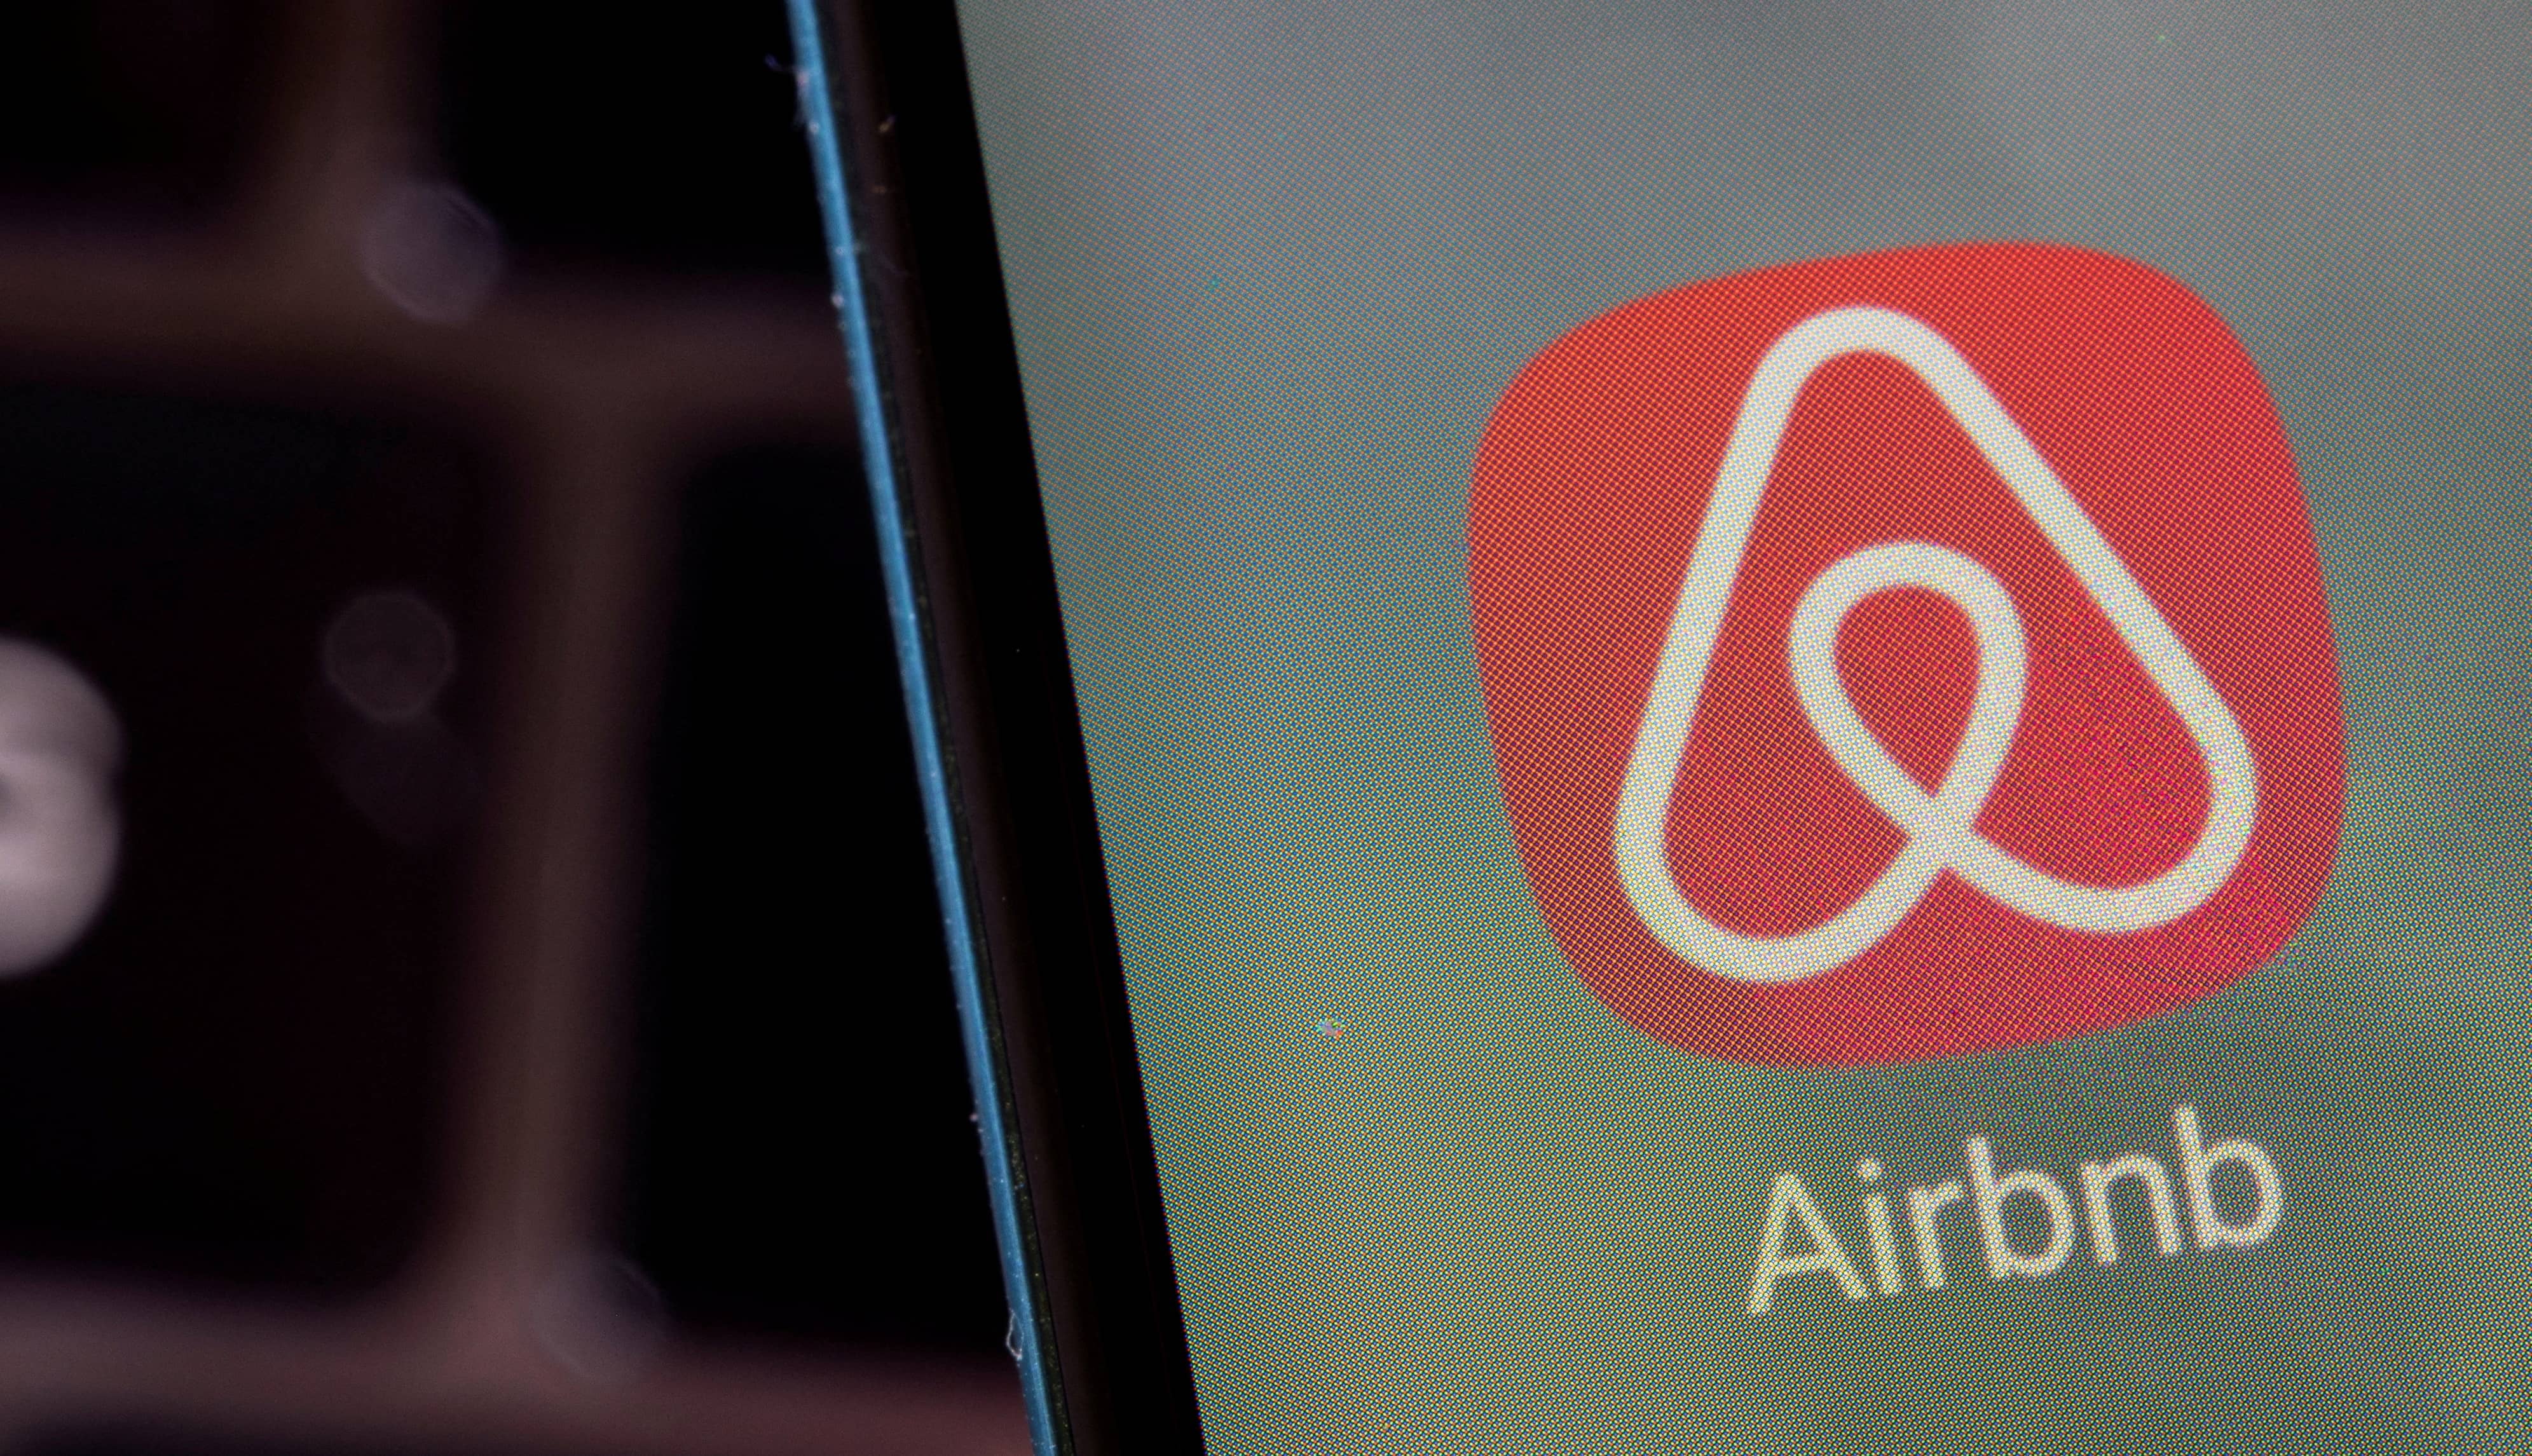 file-photo-illustration-shows-airbnb-app